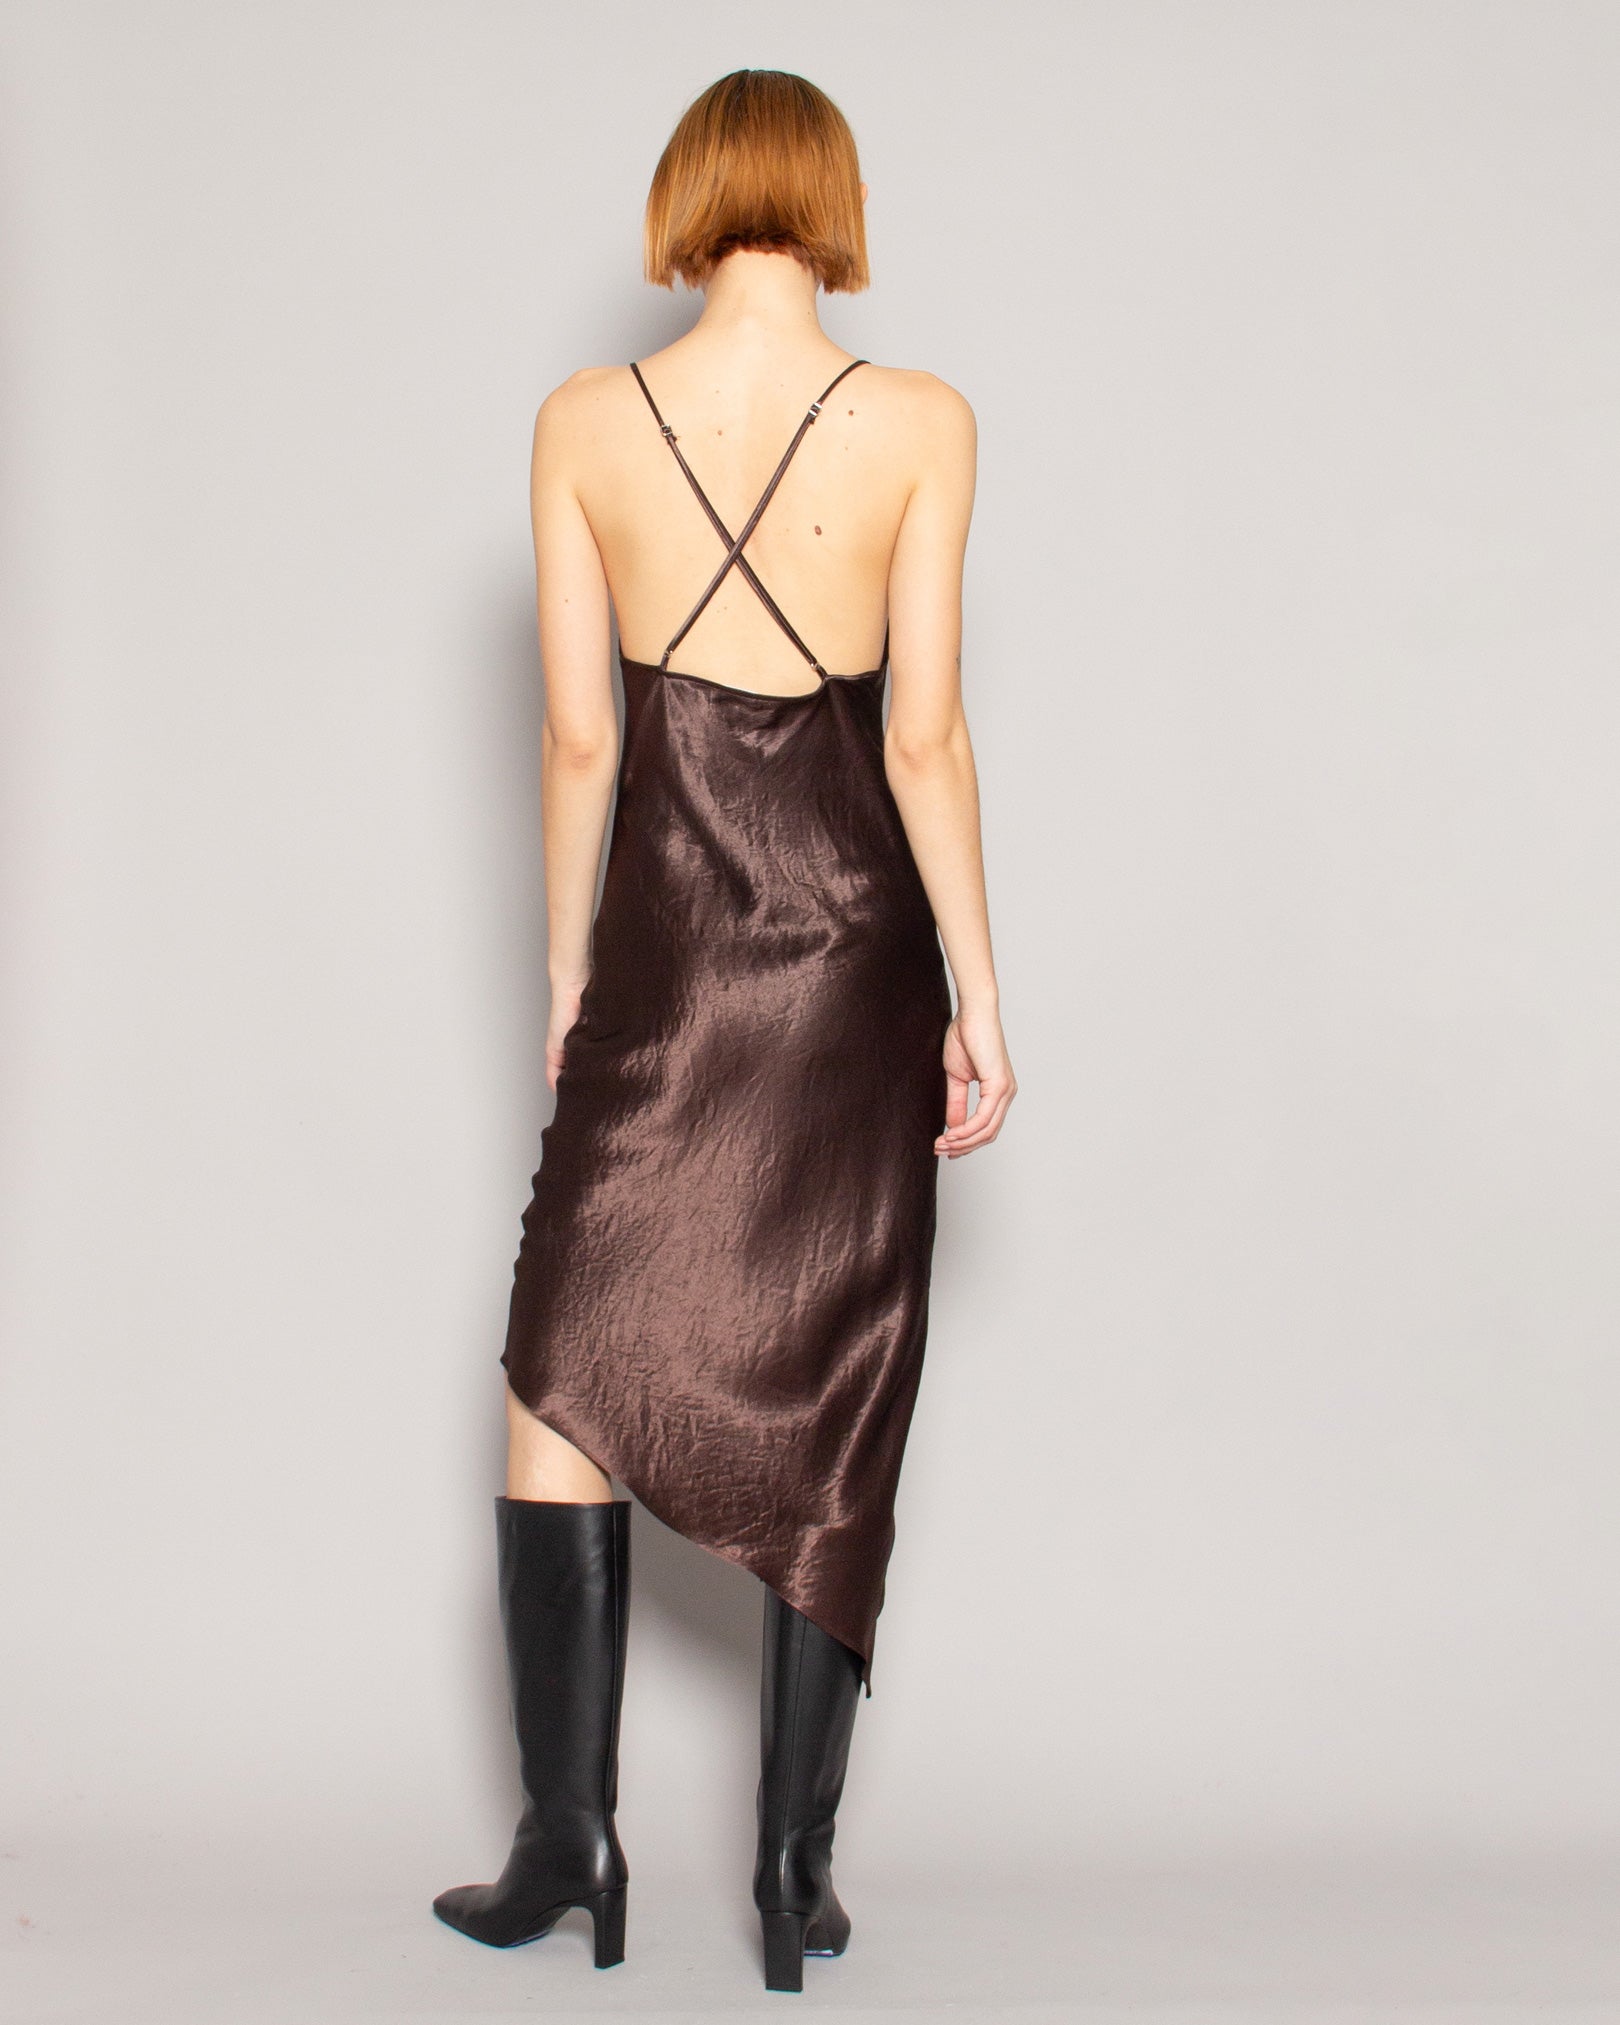 NOMIA Crossback Halter Dress in Dark Brown available at Lahn.shop